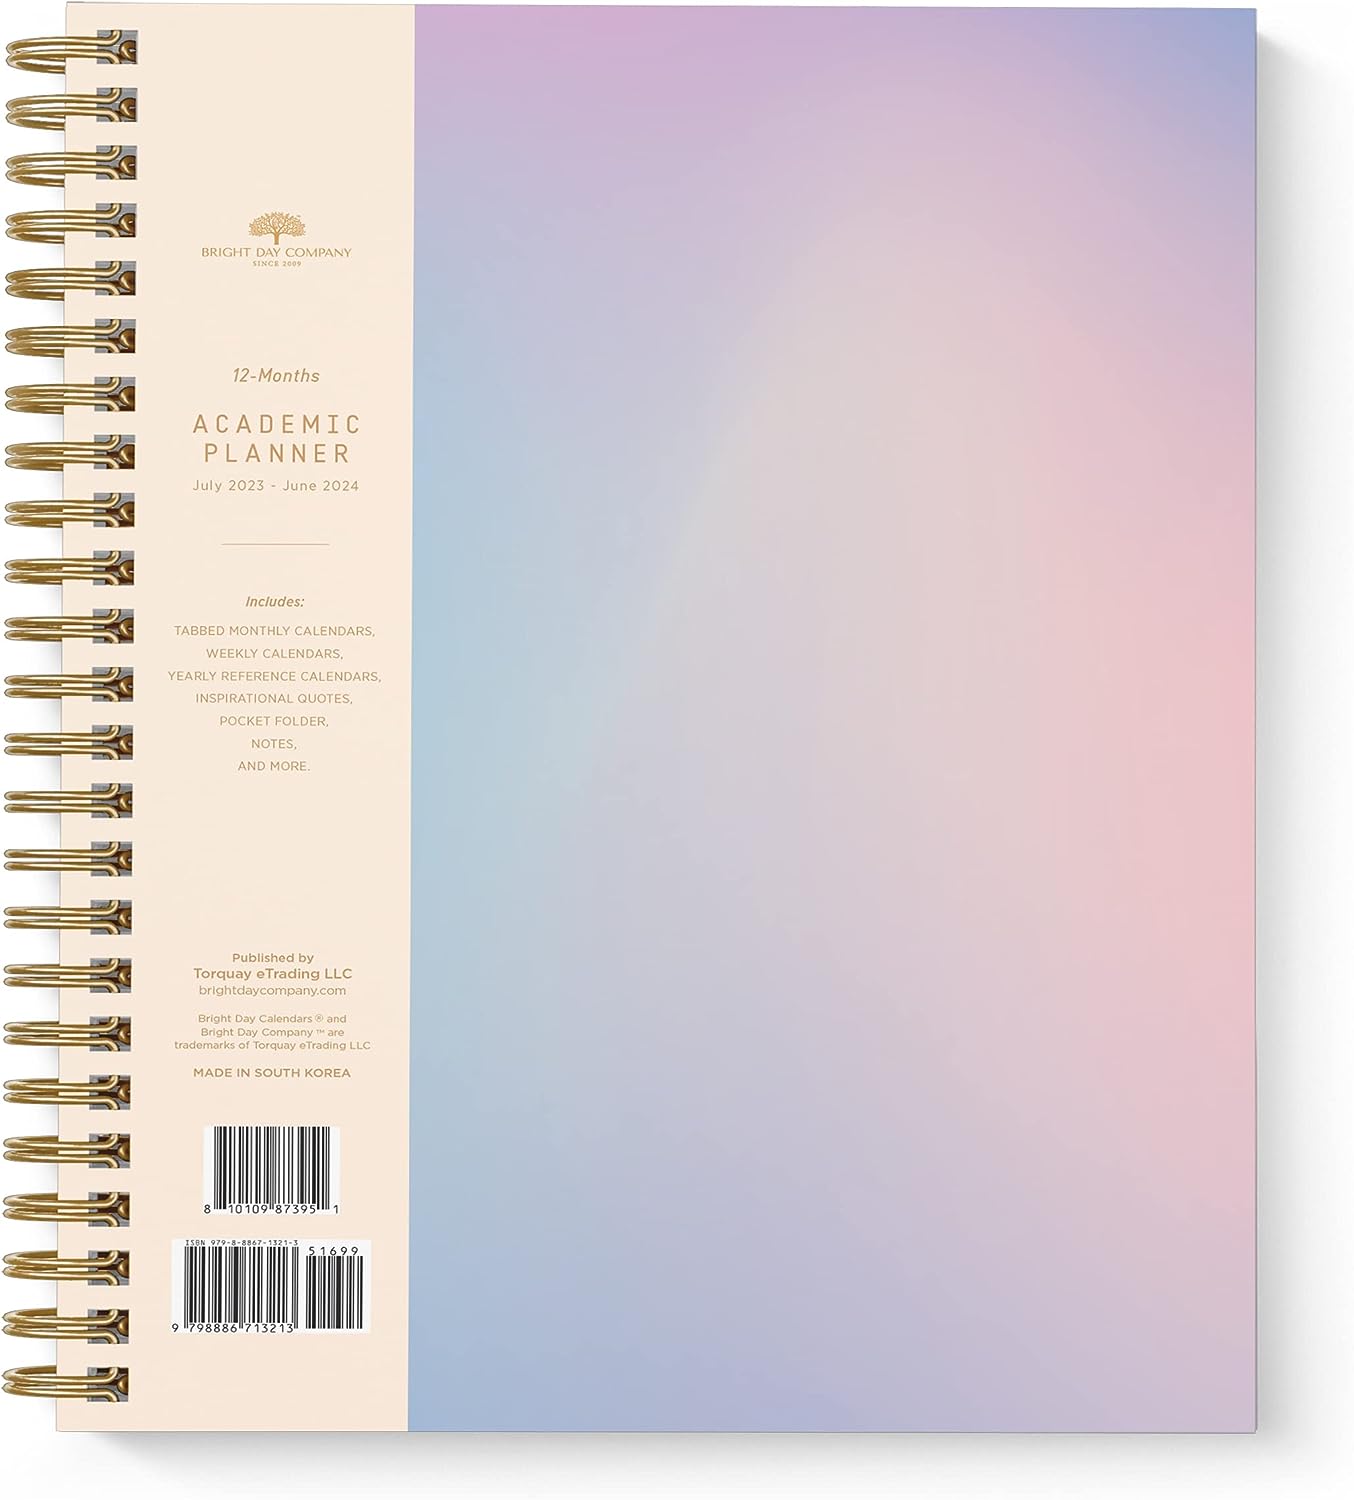 Bright Day Company Academic Planer June 22 - July 23 RRP £12.99 CLEARANCE XL £3.99